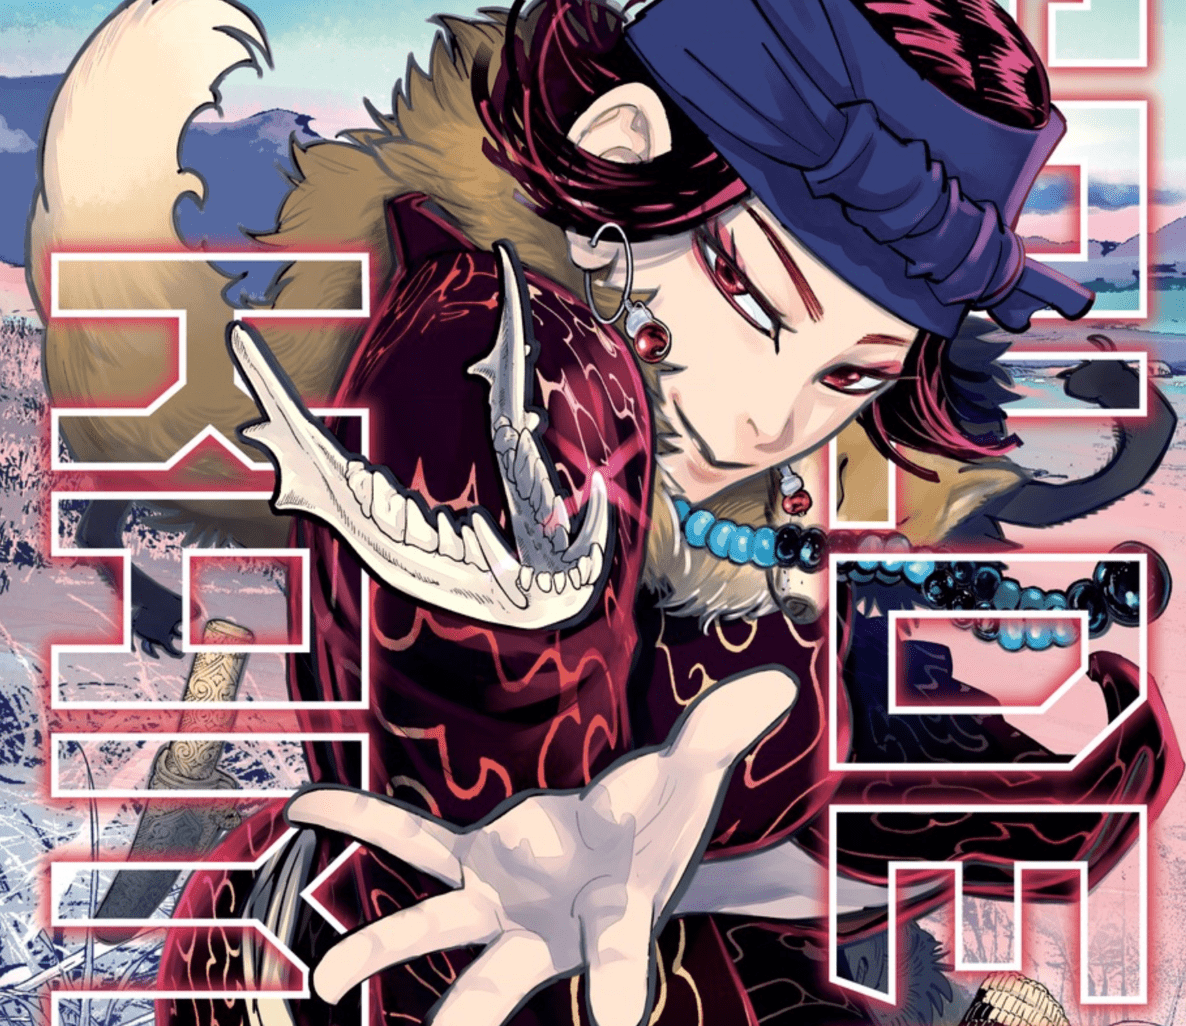 Golden Kamuy Vol. 12 Review